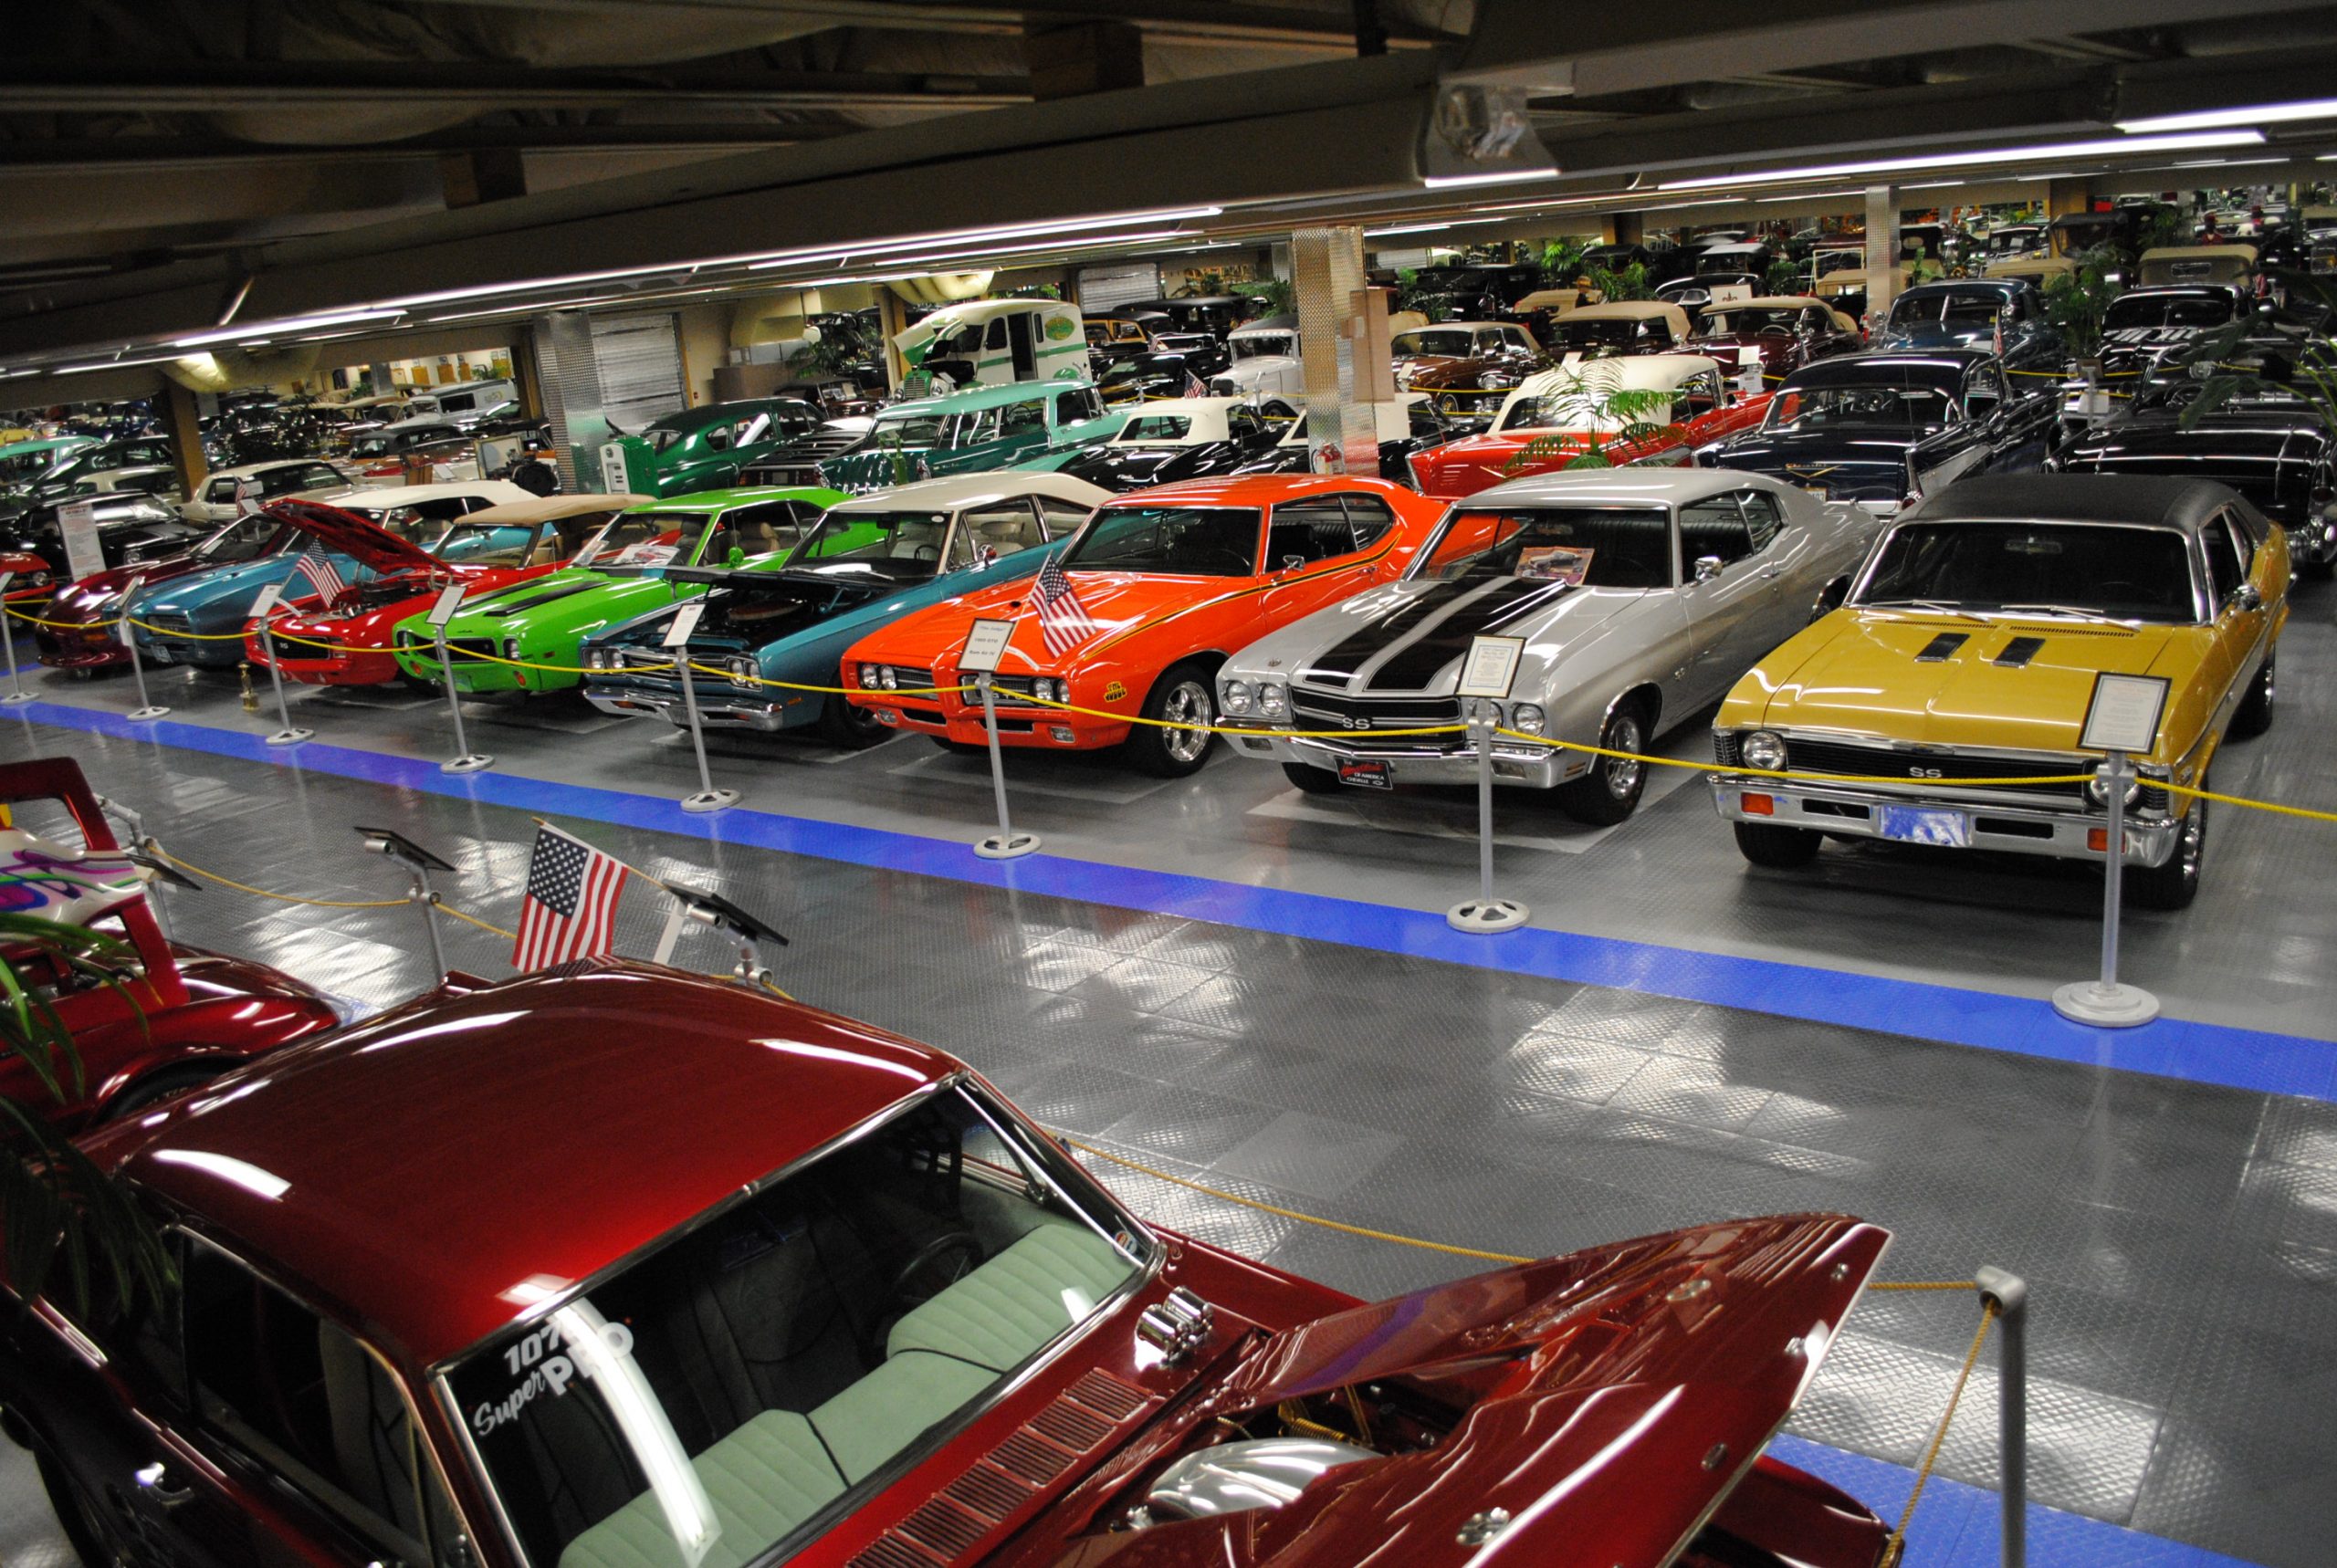 Tallahassee Automobile Museum